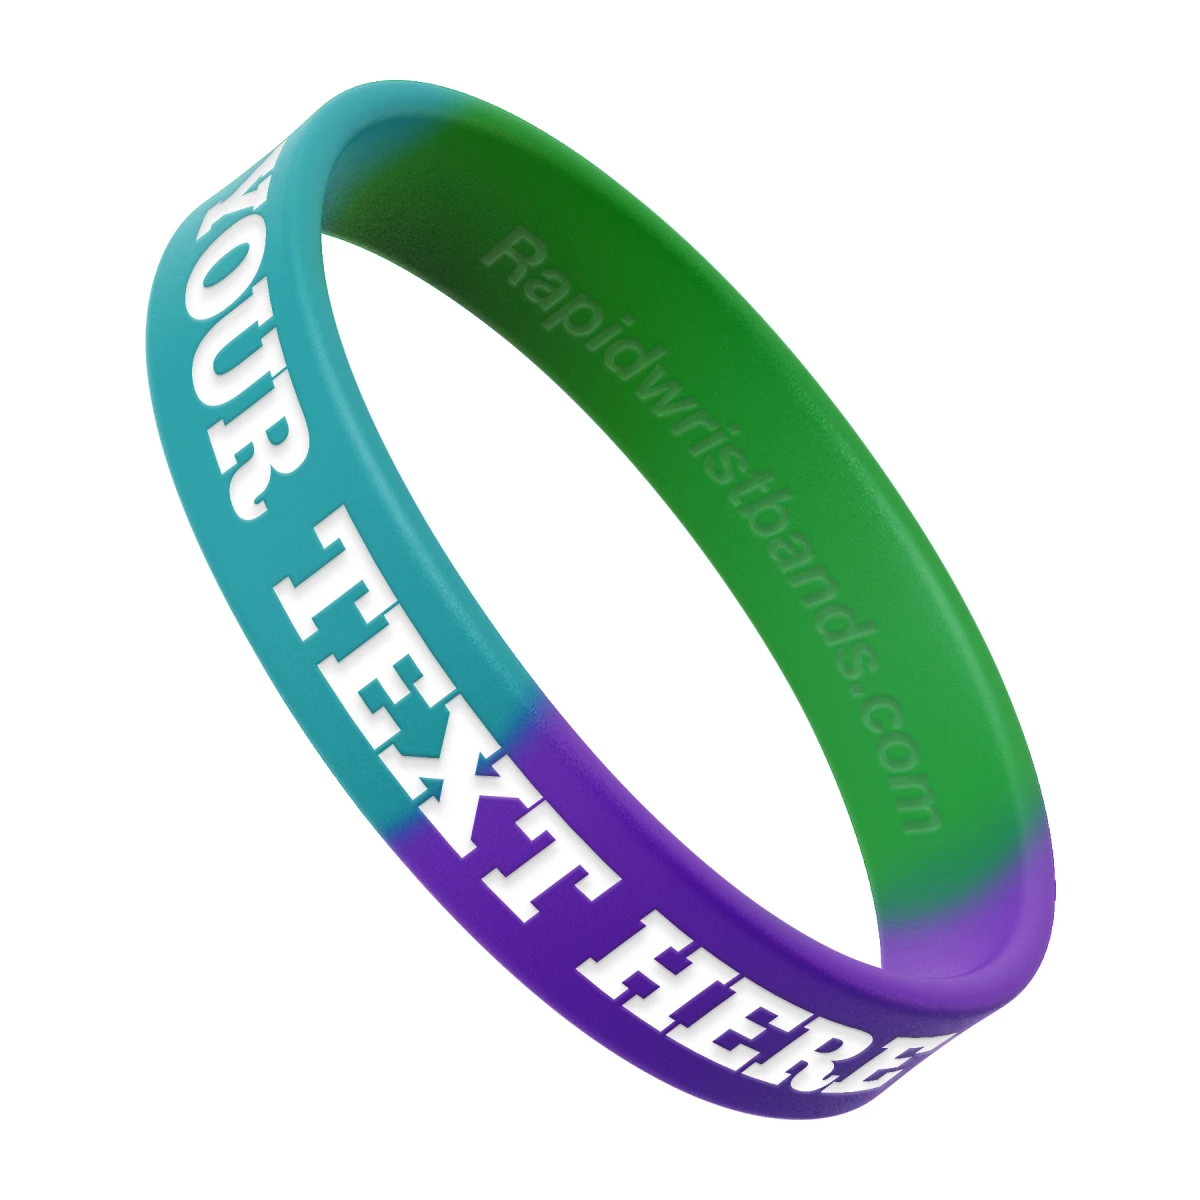 Segmented Teal/Green/Purple Wristband With Your Text Here Engraved In White